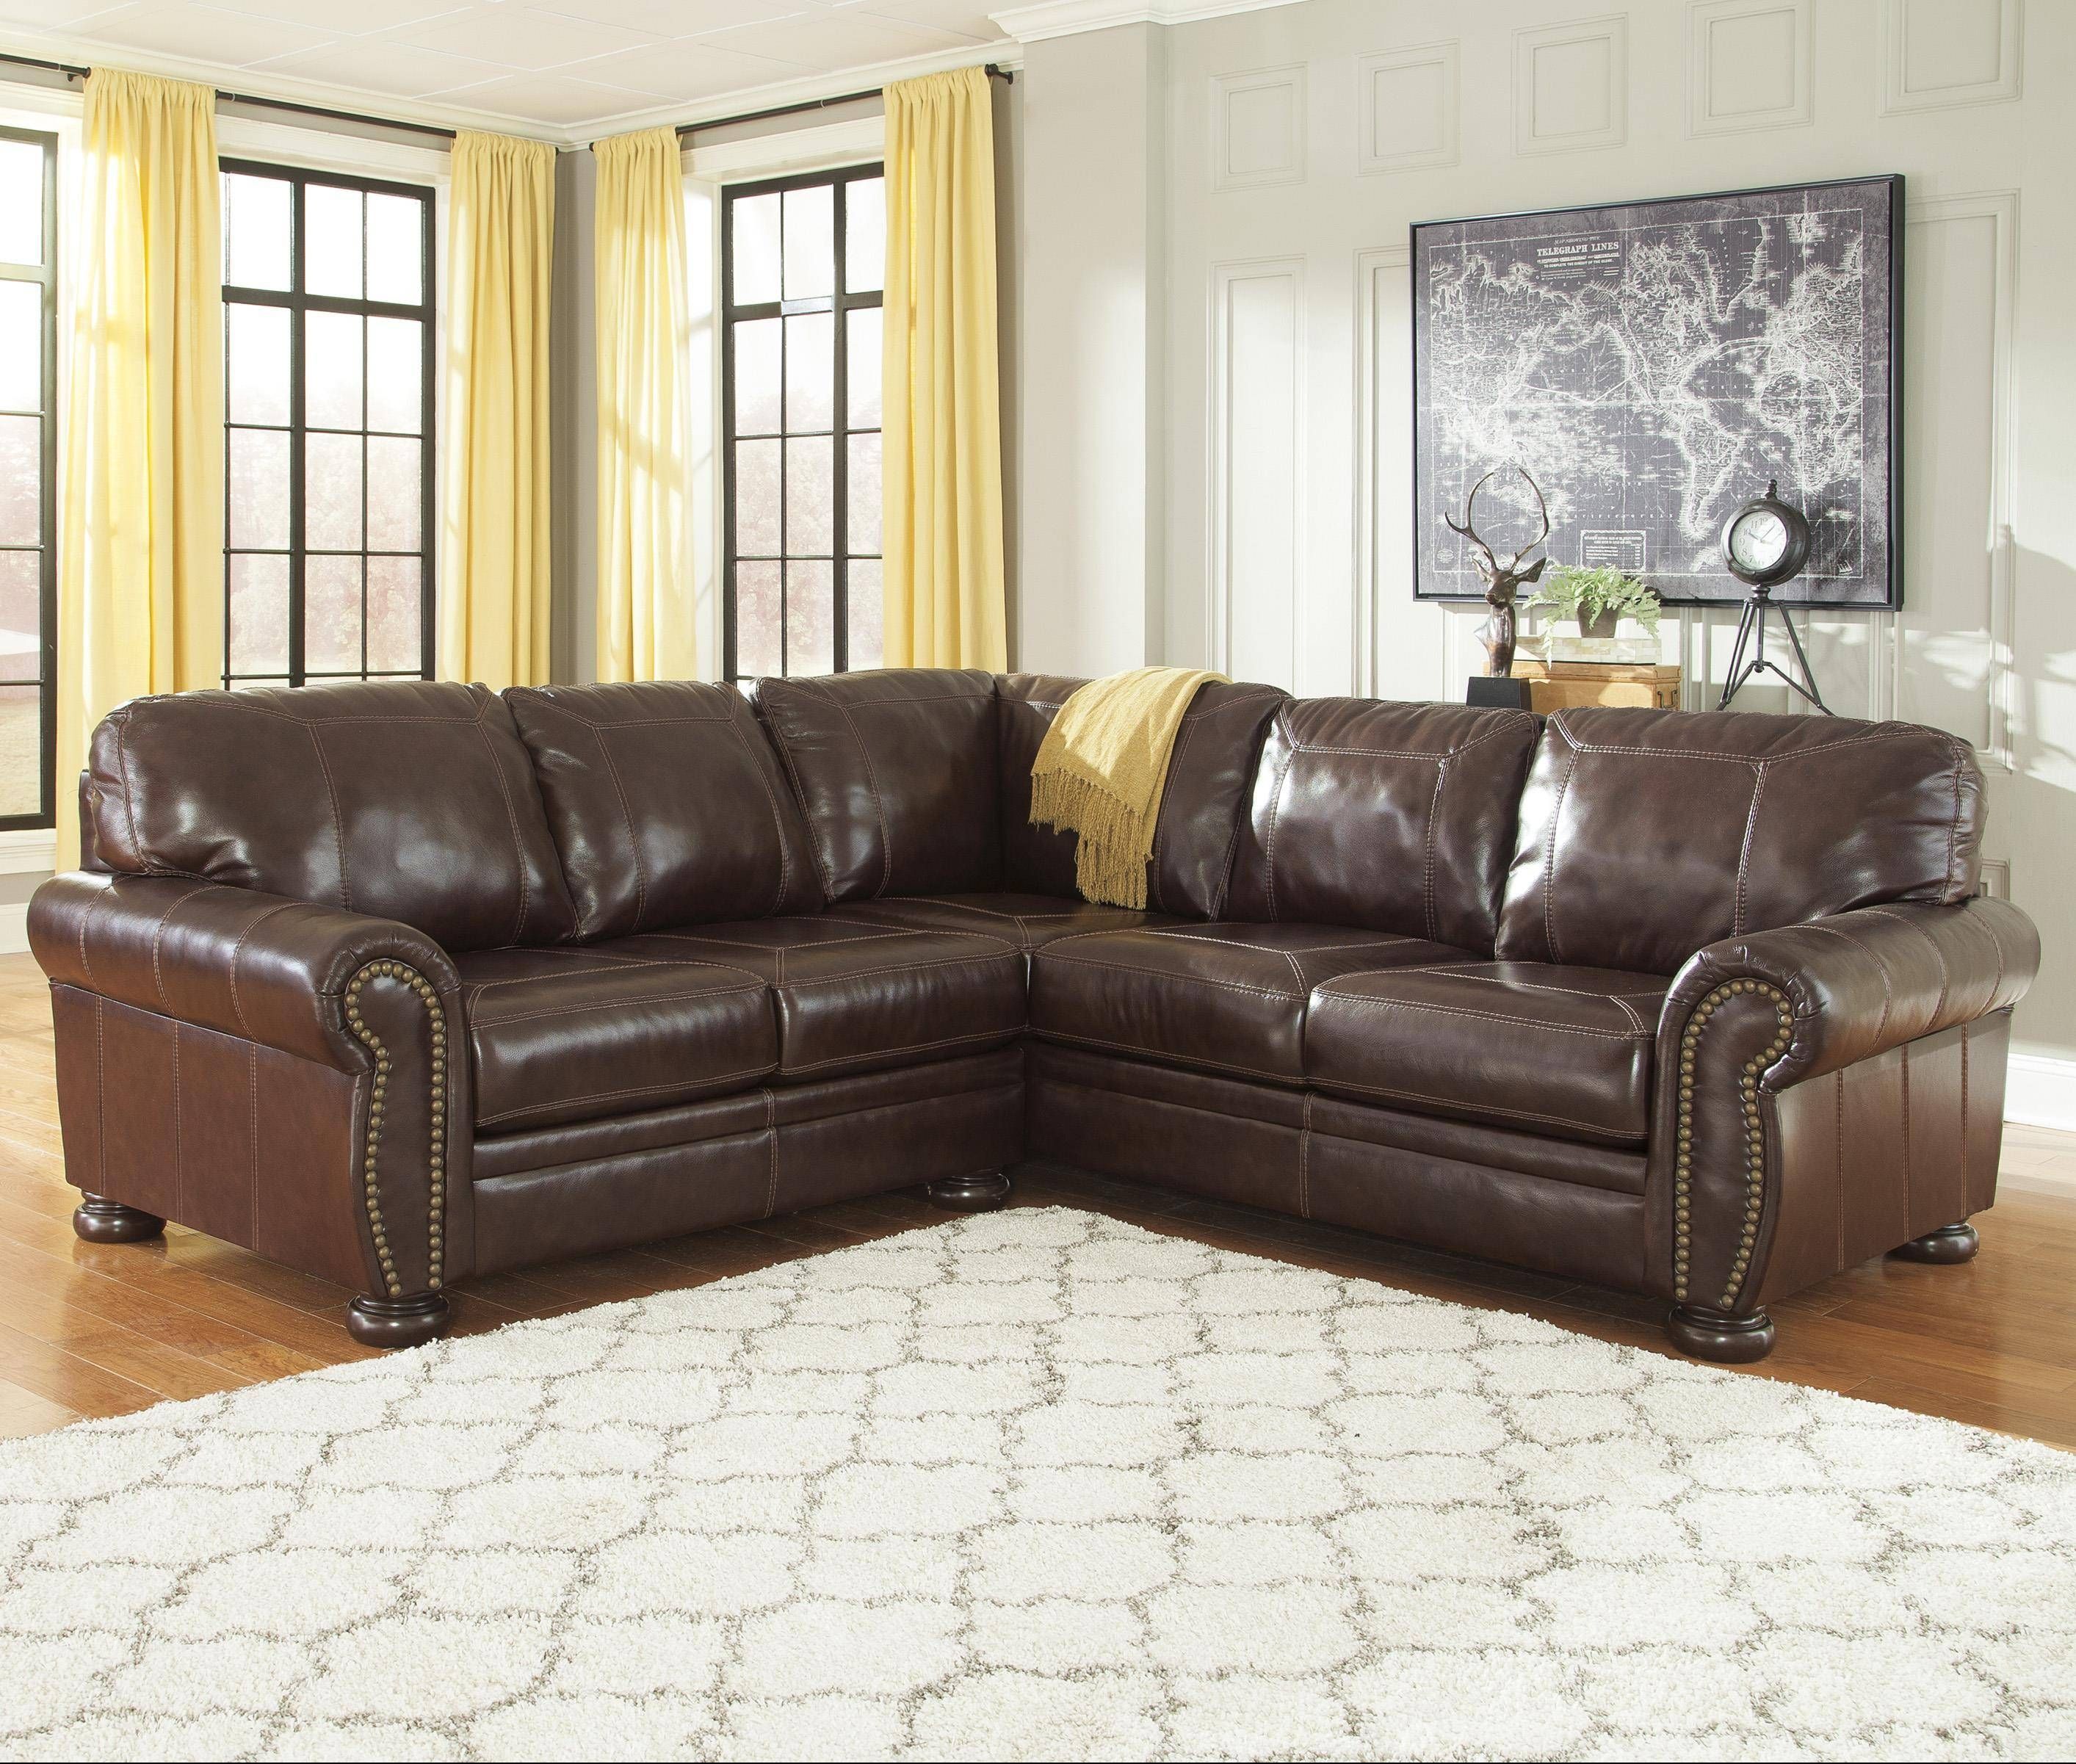 Sectional Sofas | Worcester, Boston, Ma, Providence, Ri, And New In 10 Piece Sectional Sofa (View 17 of 30)